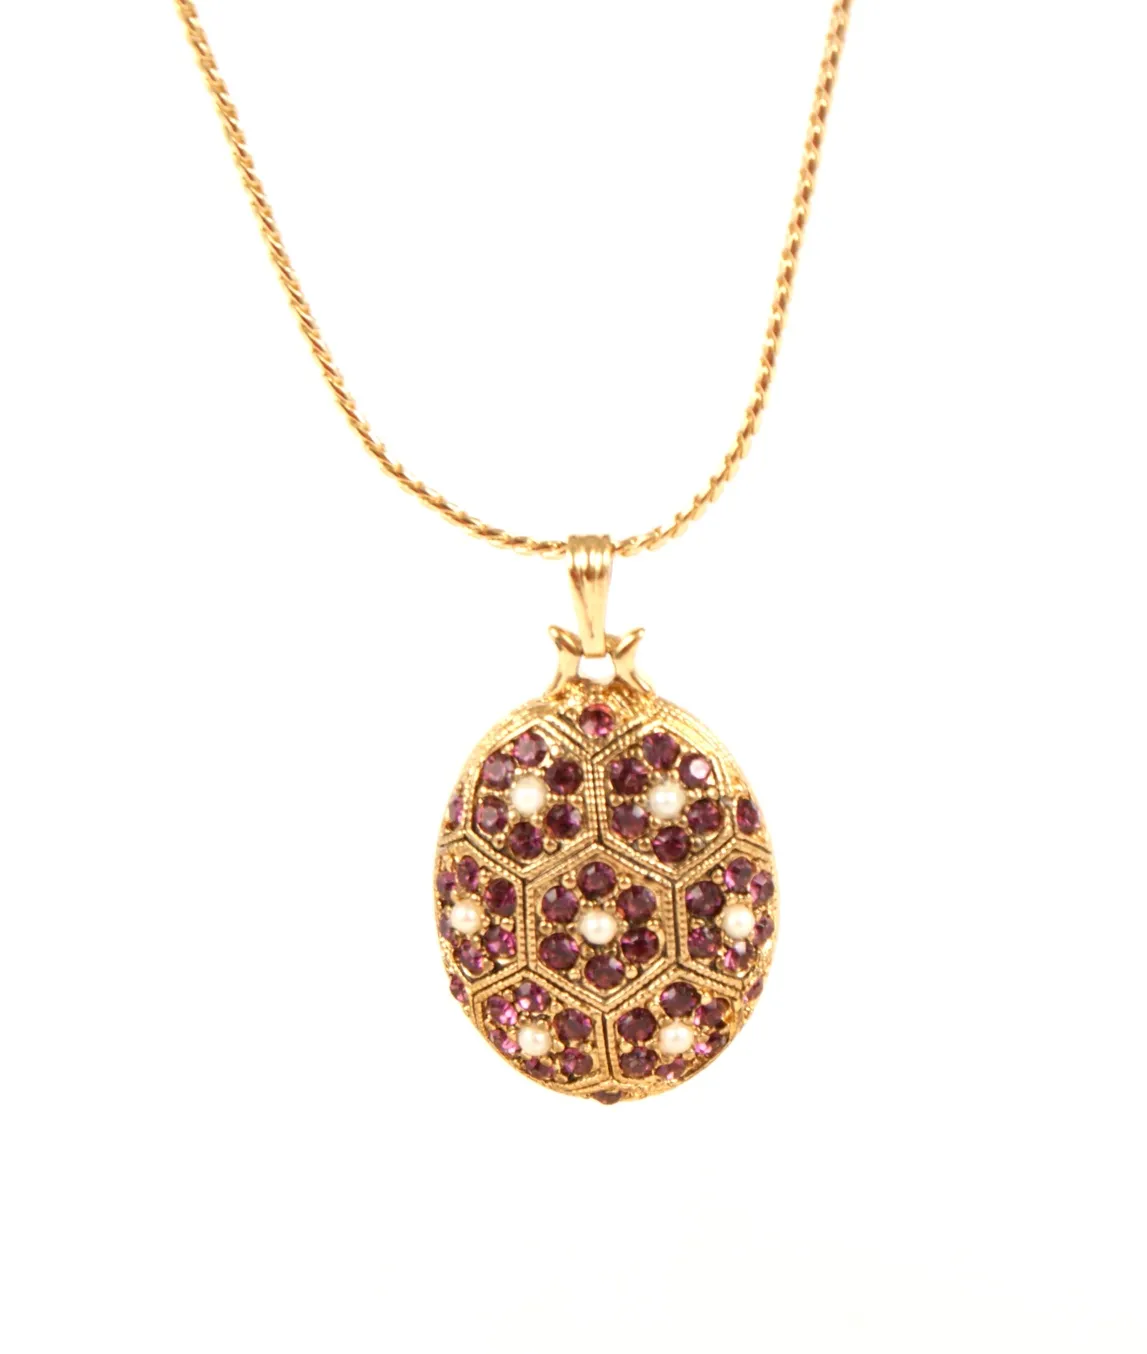 D'Orlan pendant with purple flowers